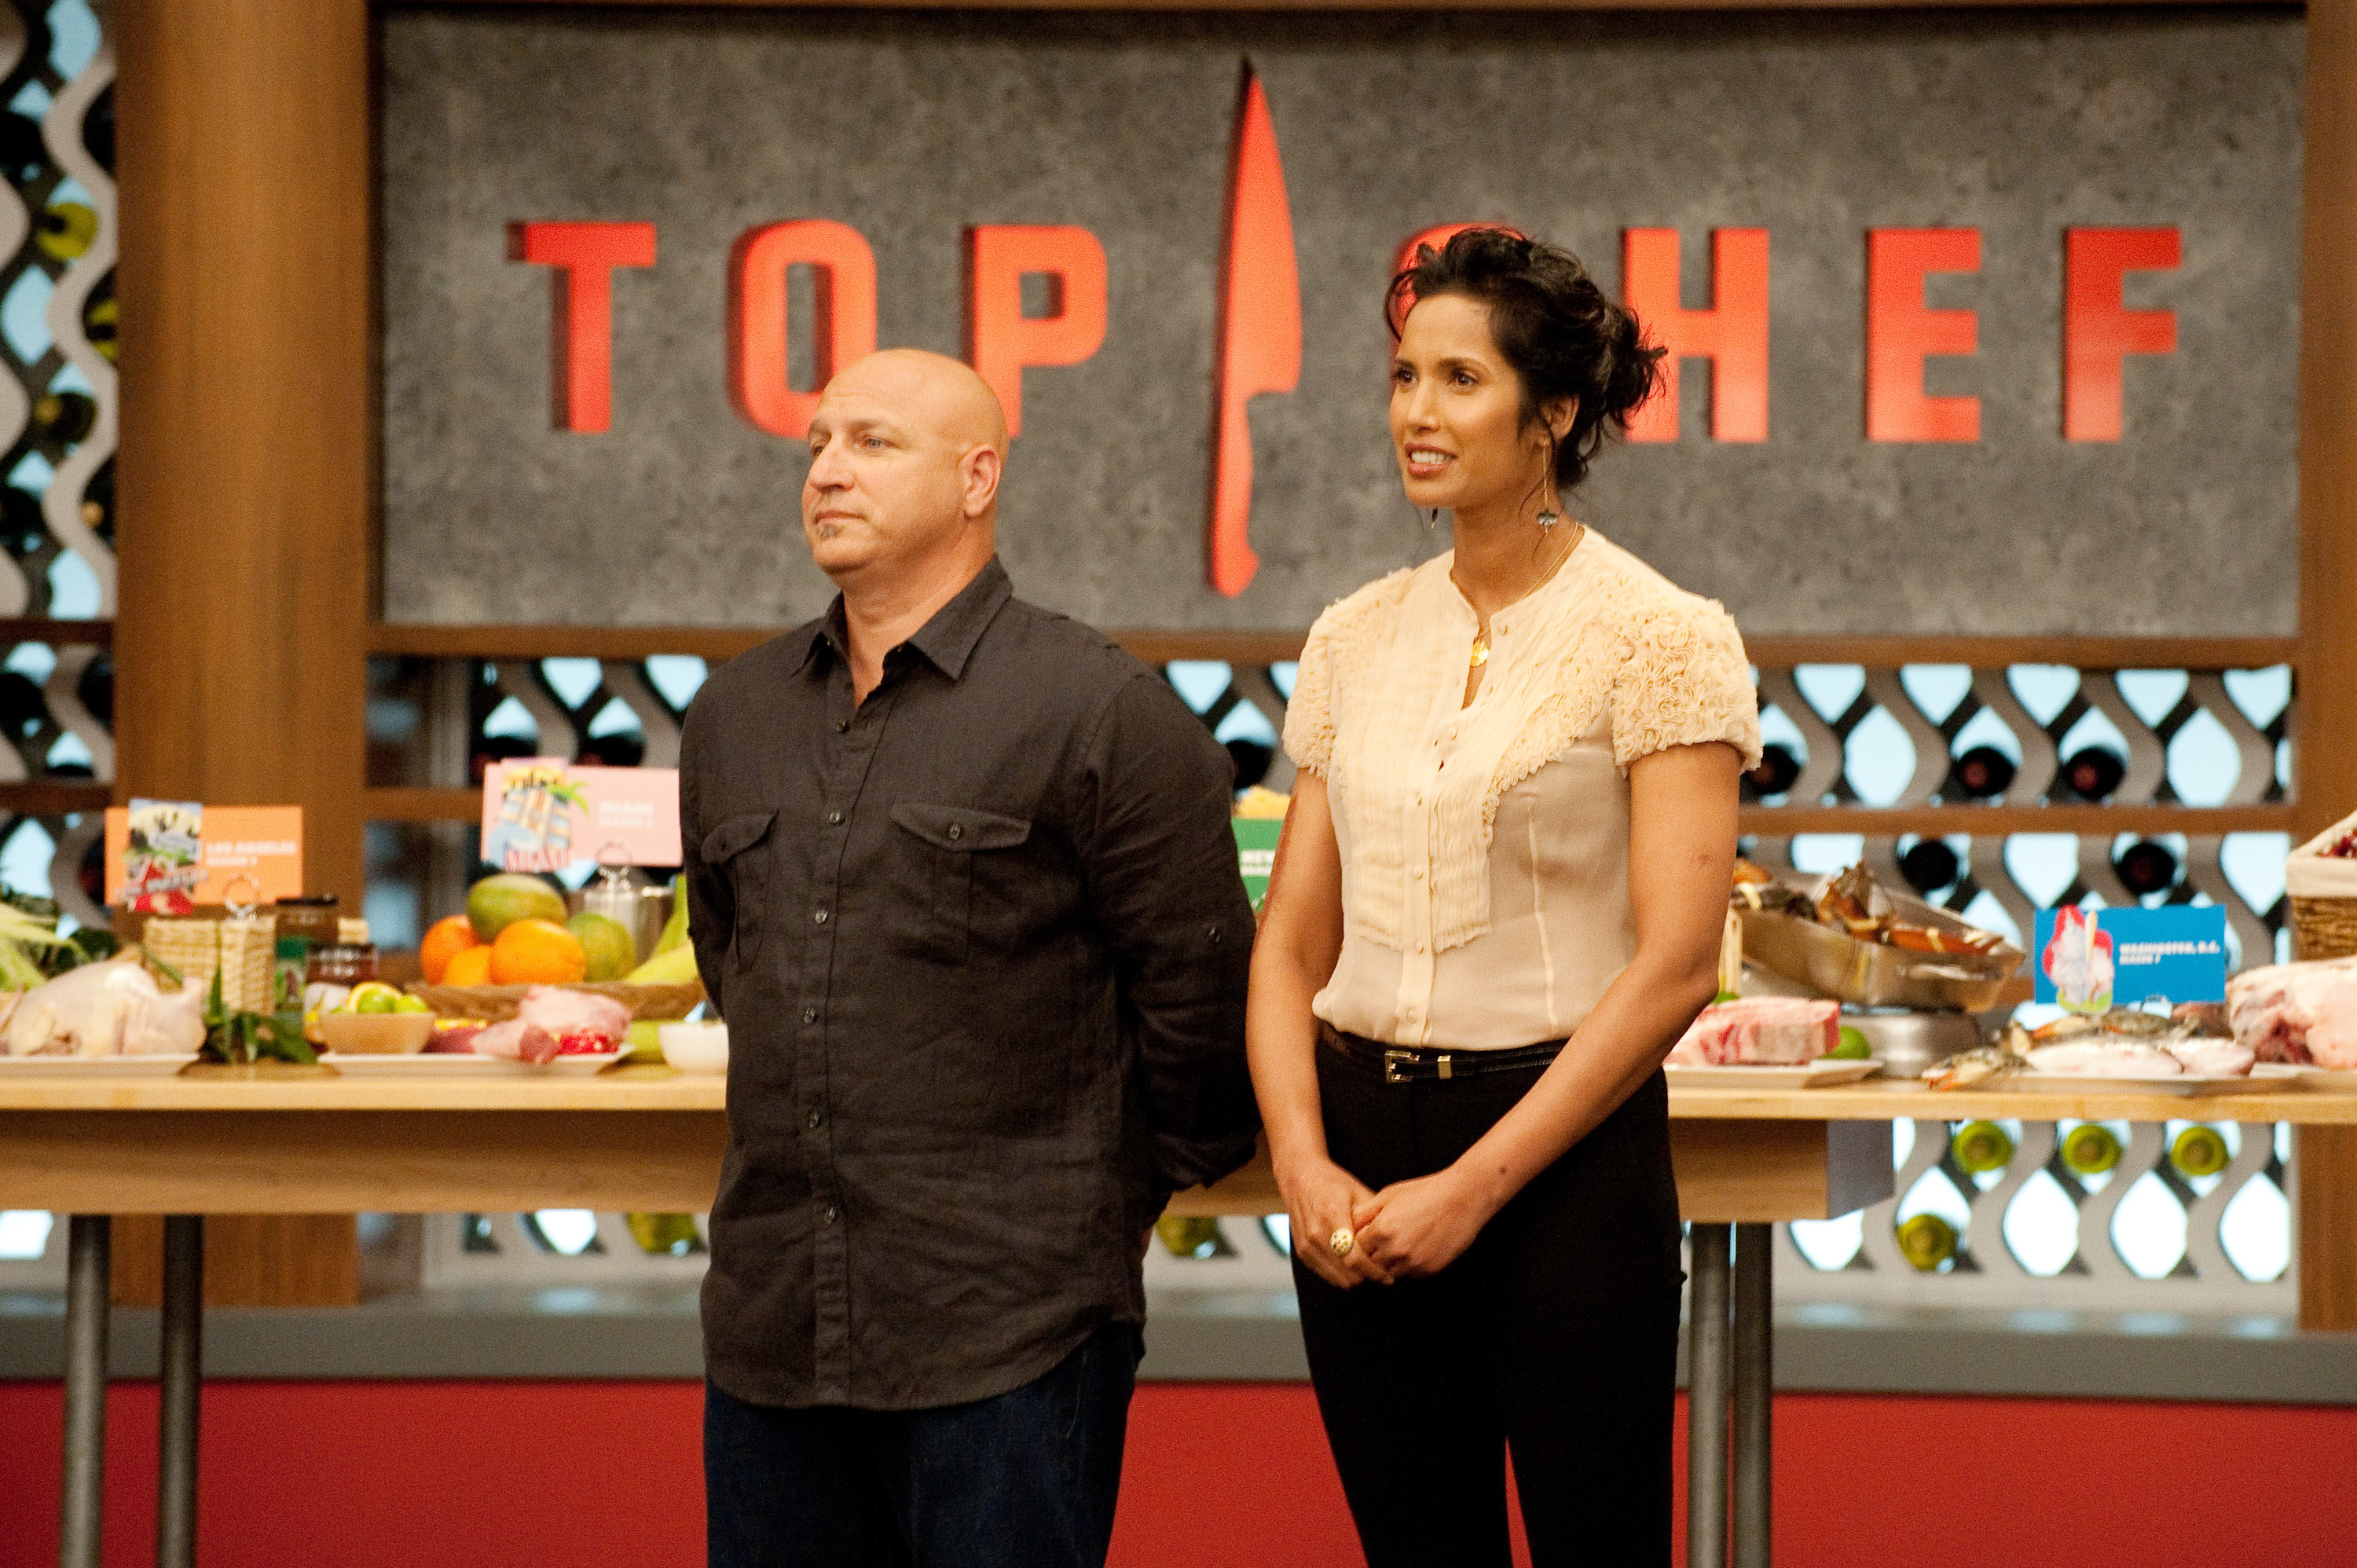 Tom and Padma stand next to each other in the Top Chef kitchen